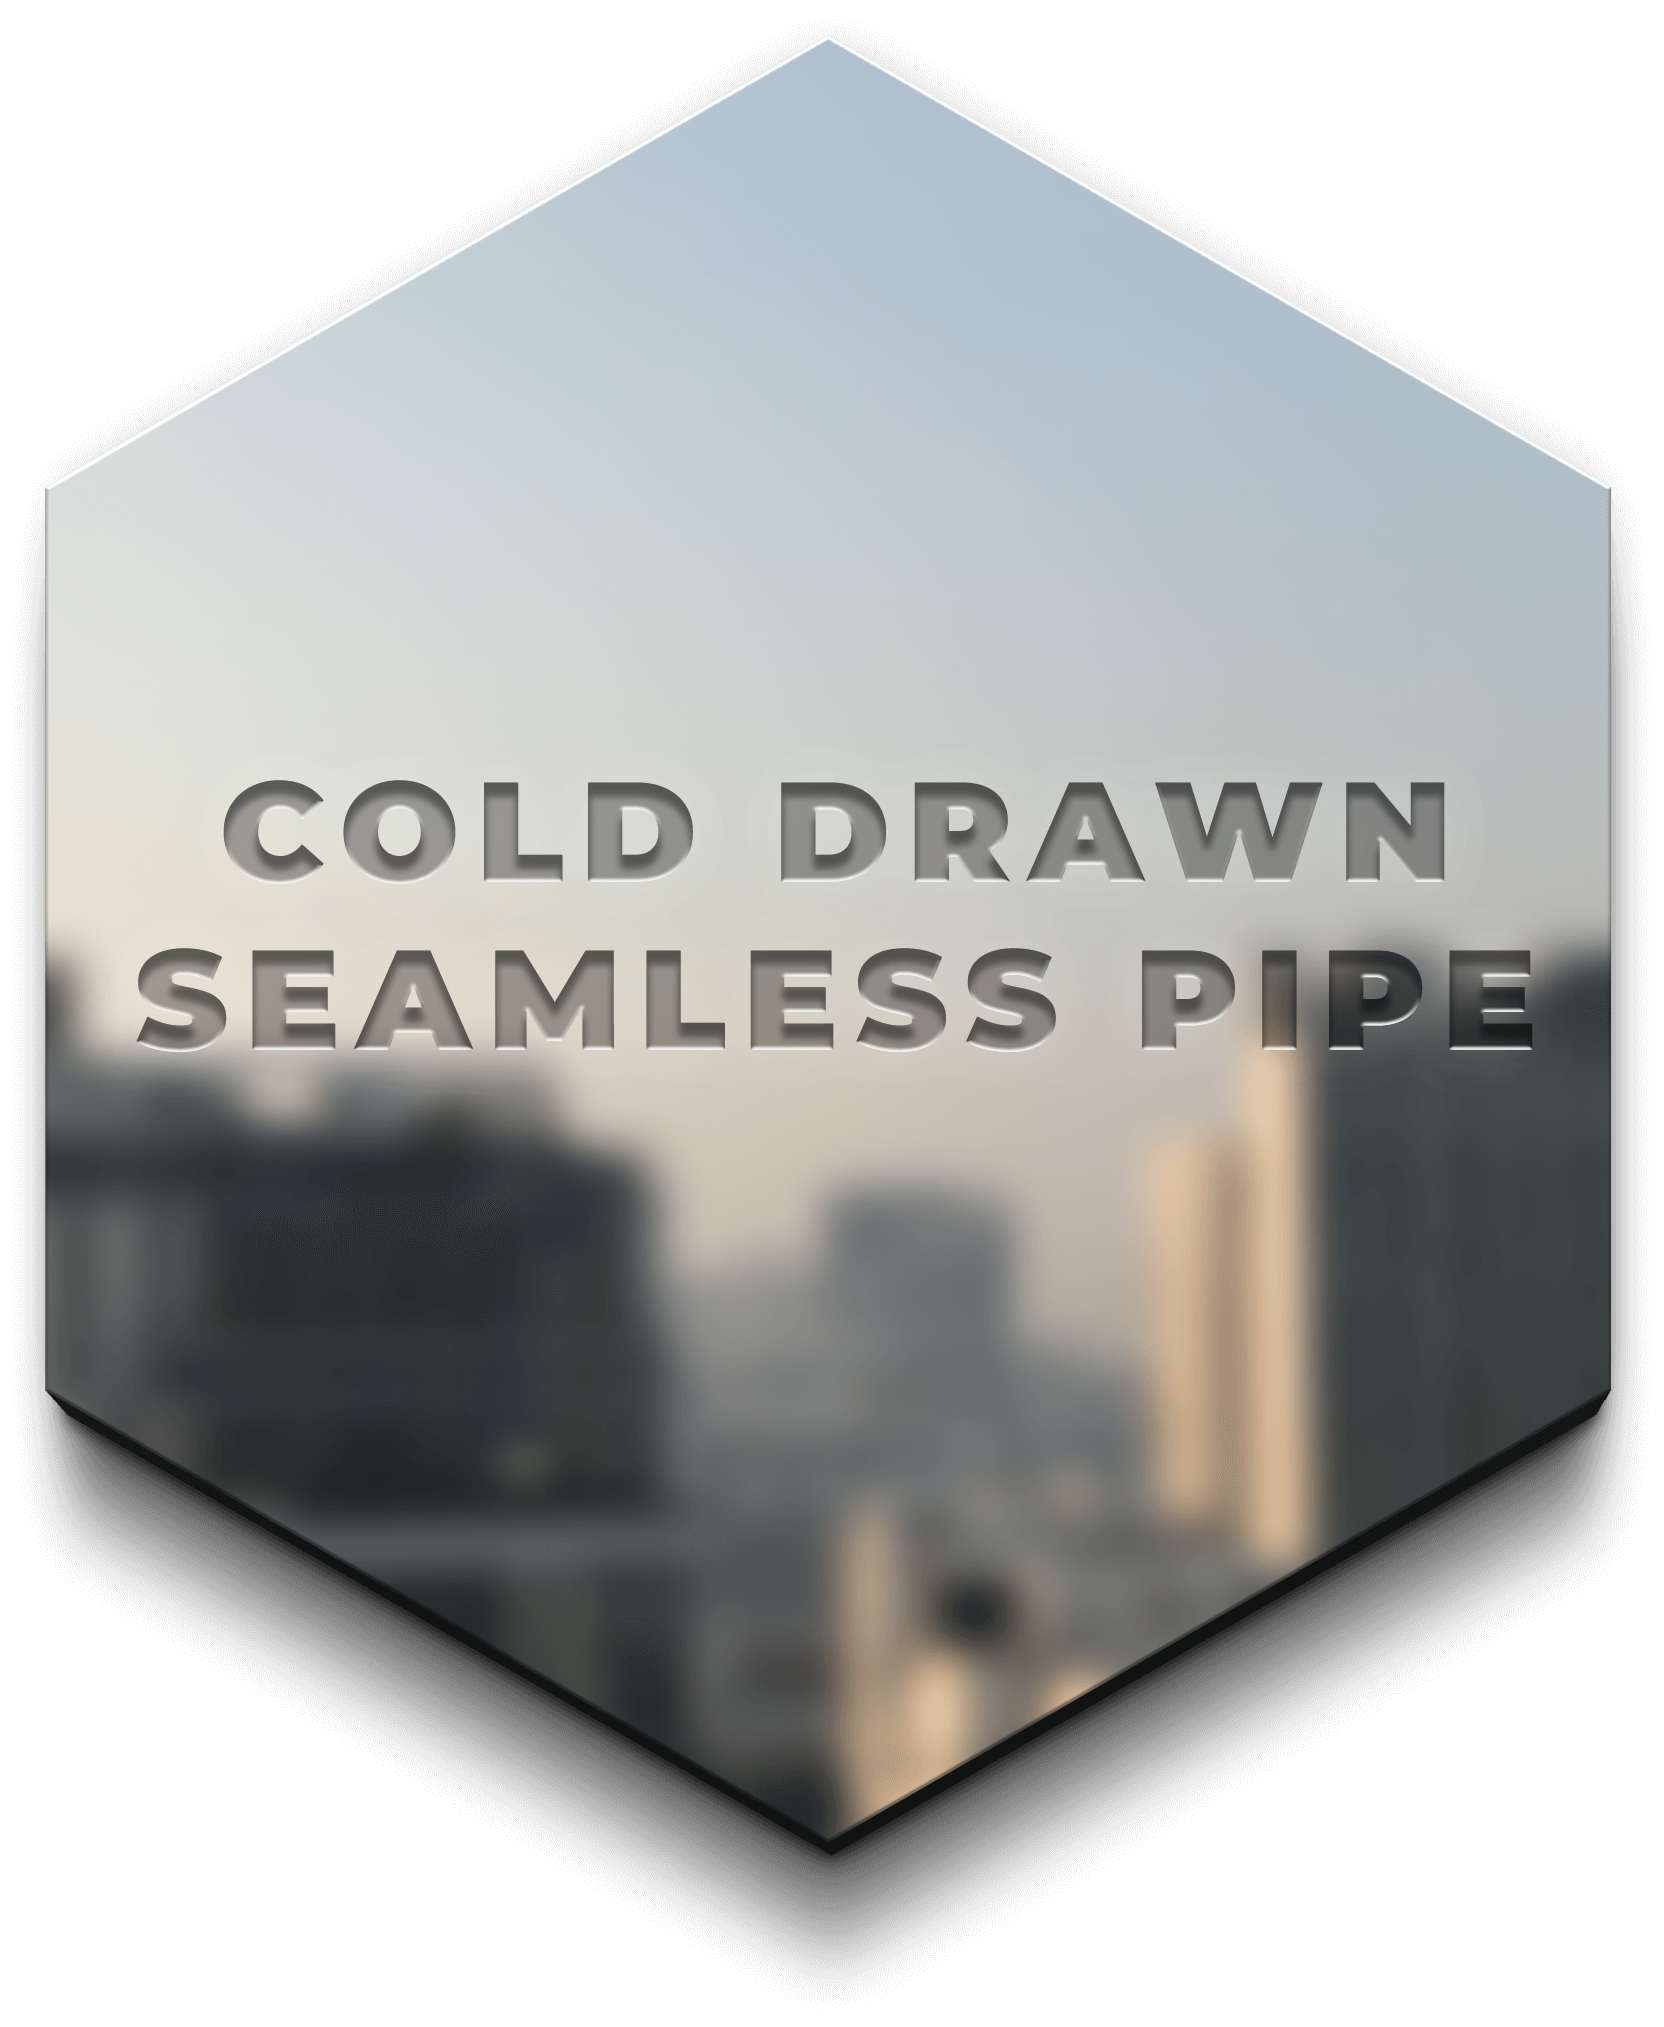 Cold Drawn seamless pipe